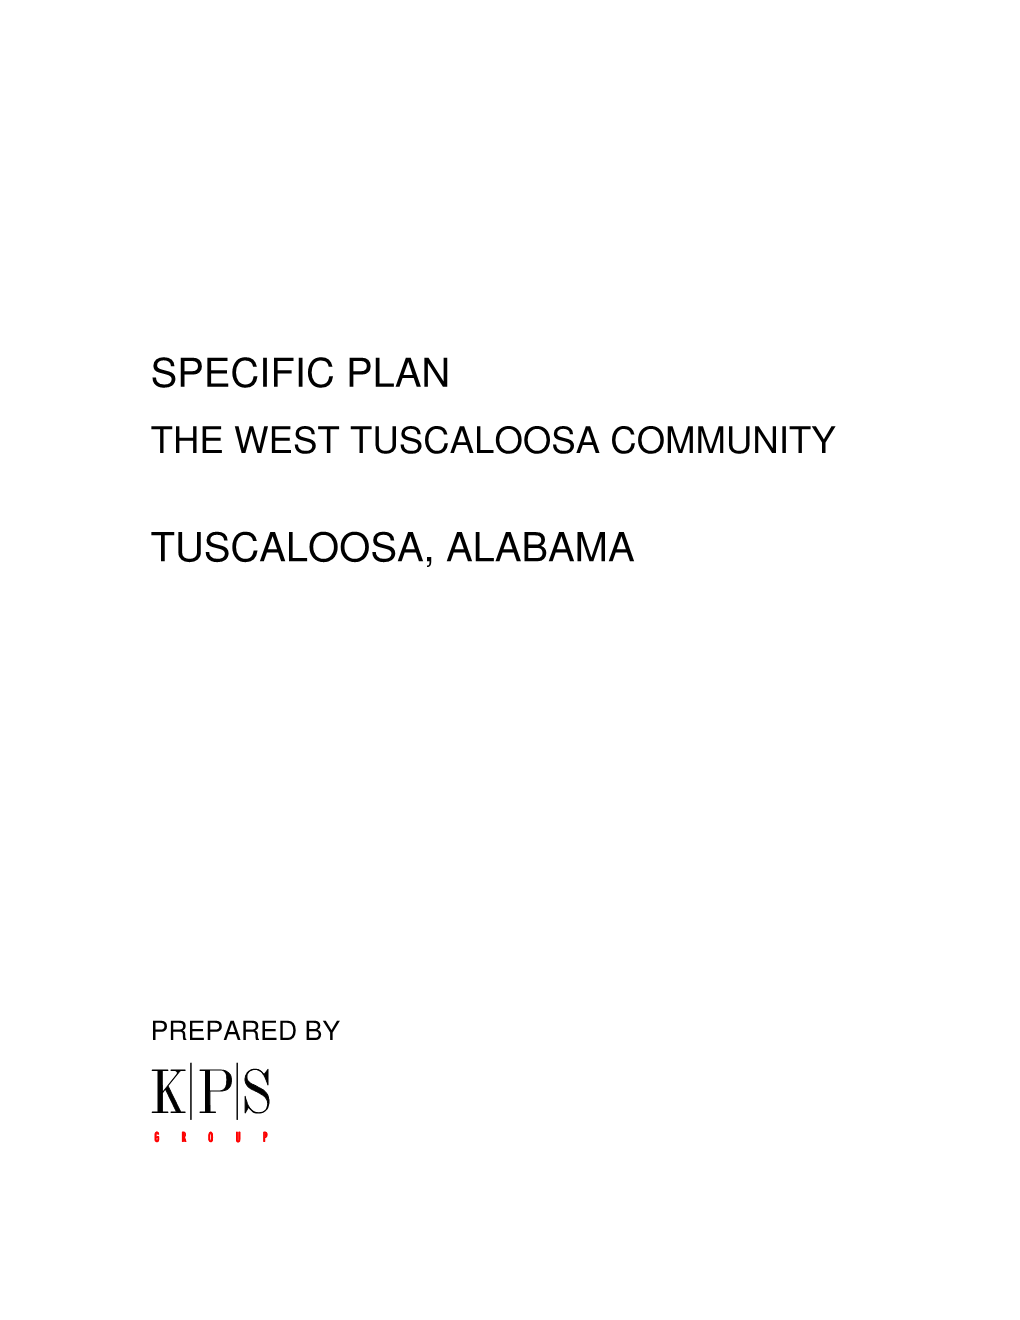 Specific Plan the West Tuscaloosa Community